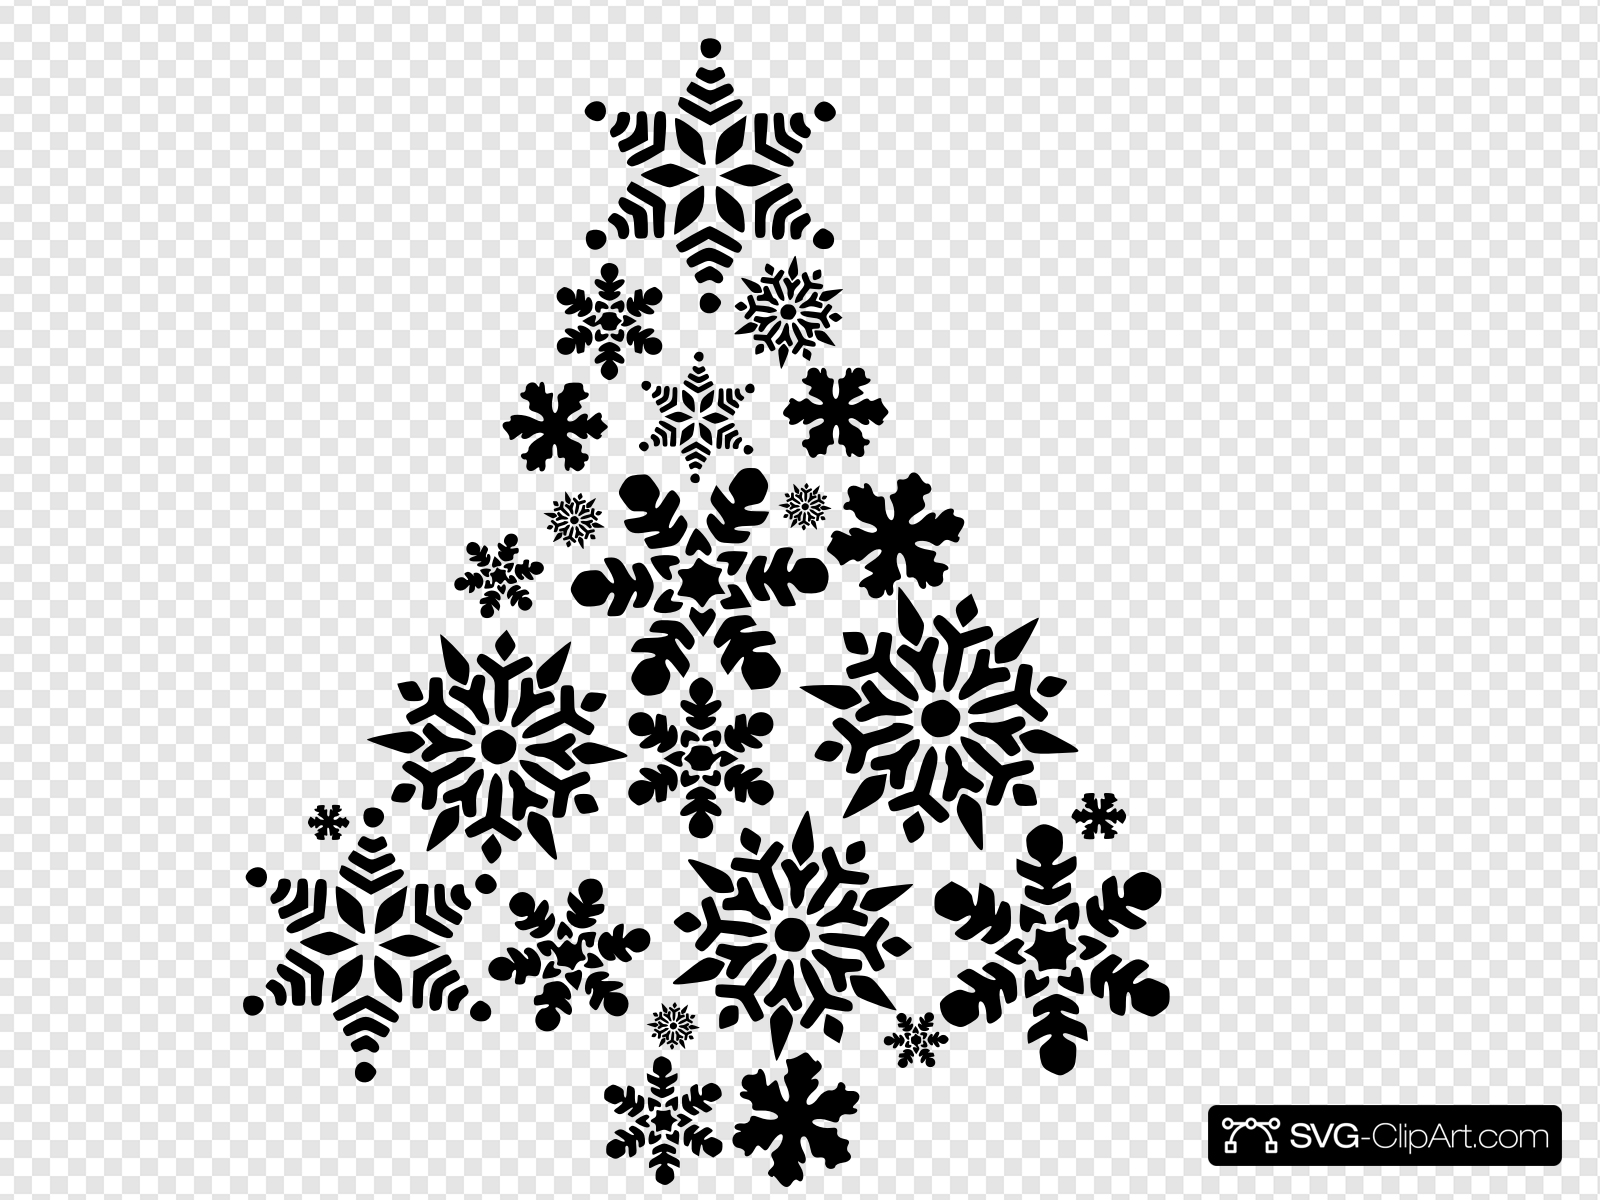 Clipart snowflake tree. Clip art icon and